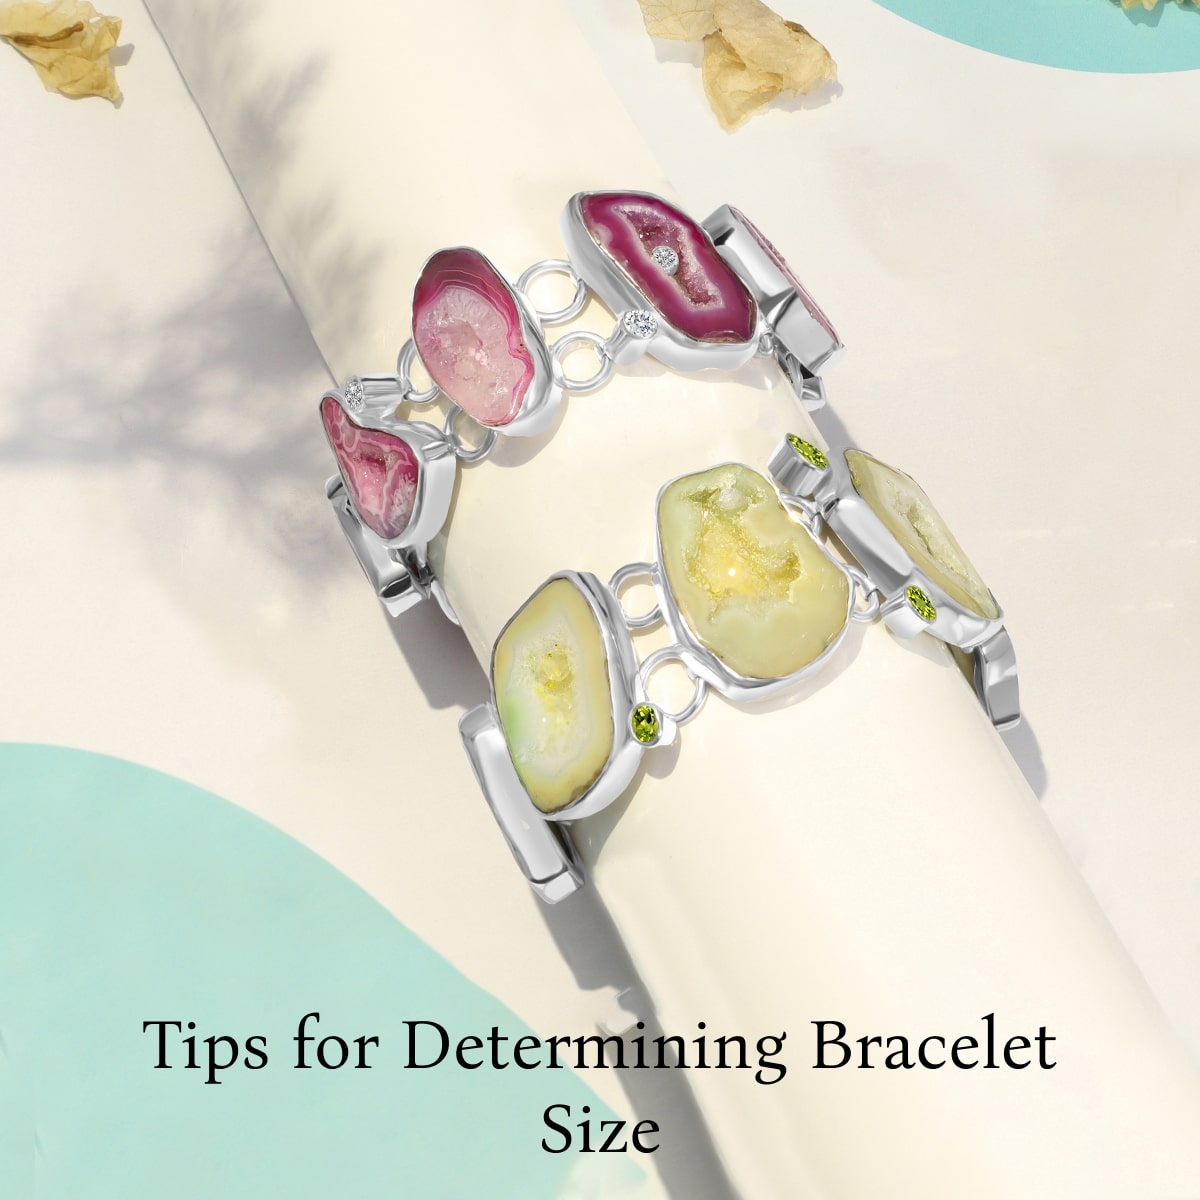 How Can You Determine Your Bracelet Size?